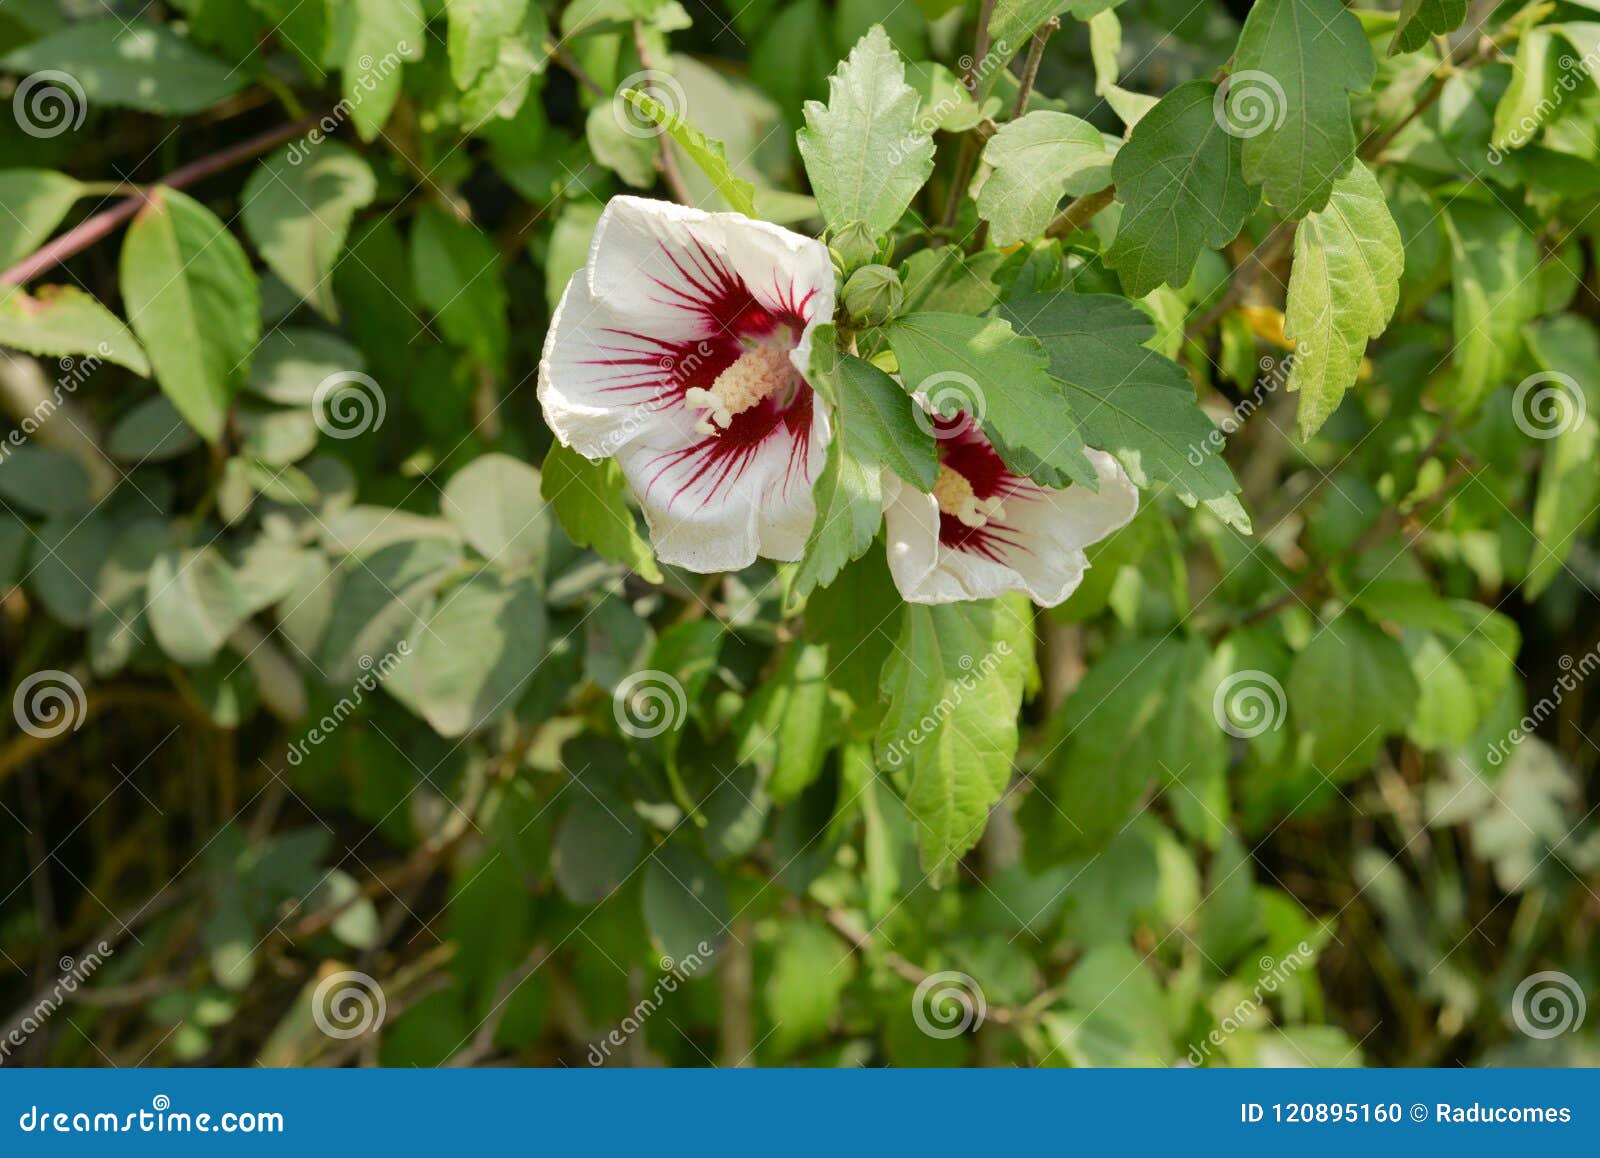 white chaba flower on a background of leaves